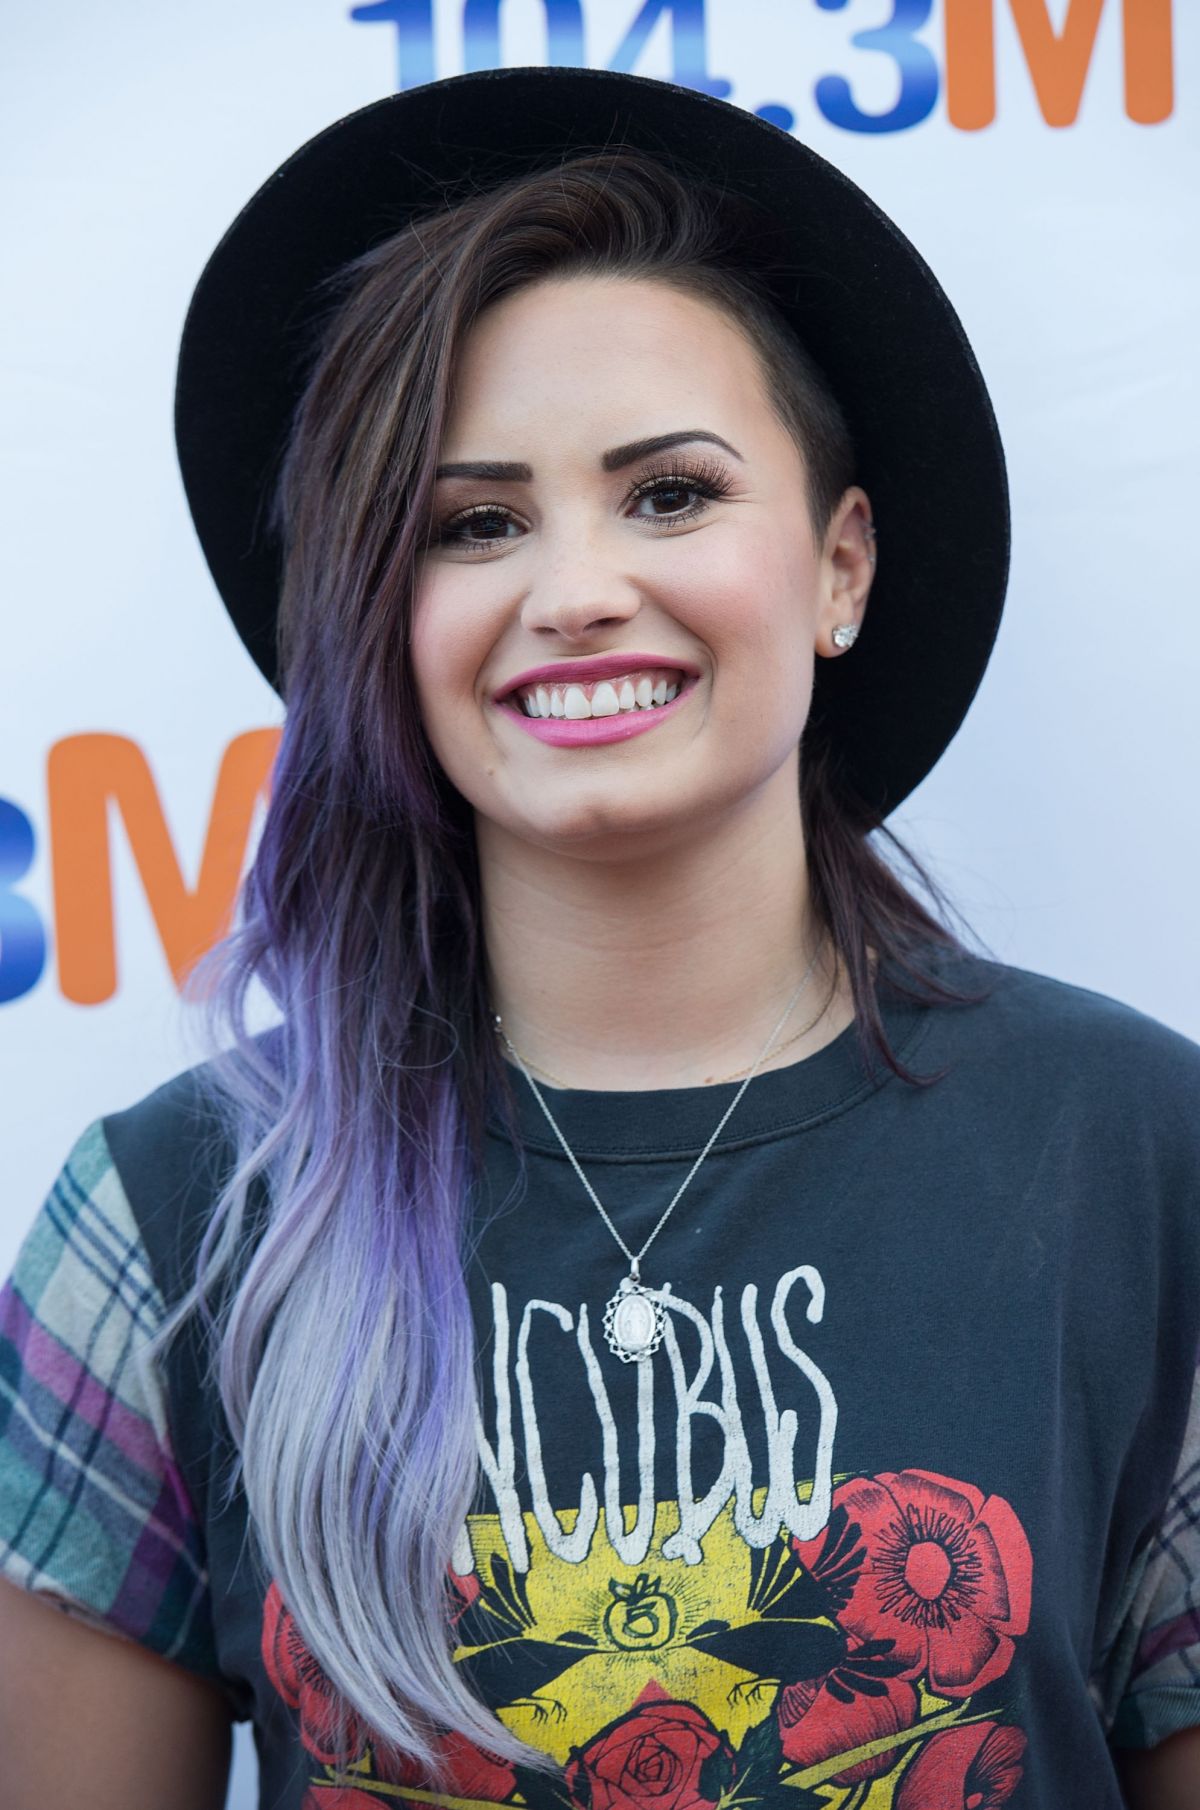 DEMI LOVATO at 104.3 MY FM Presents My Big Night Out - demi-lovato-at-104.3-my-fm-presents-my-big-night-out_1